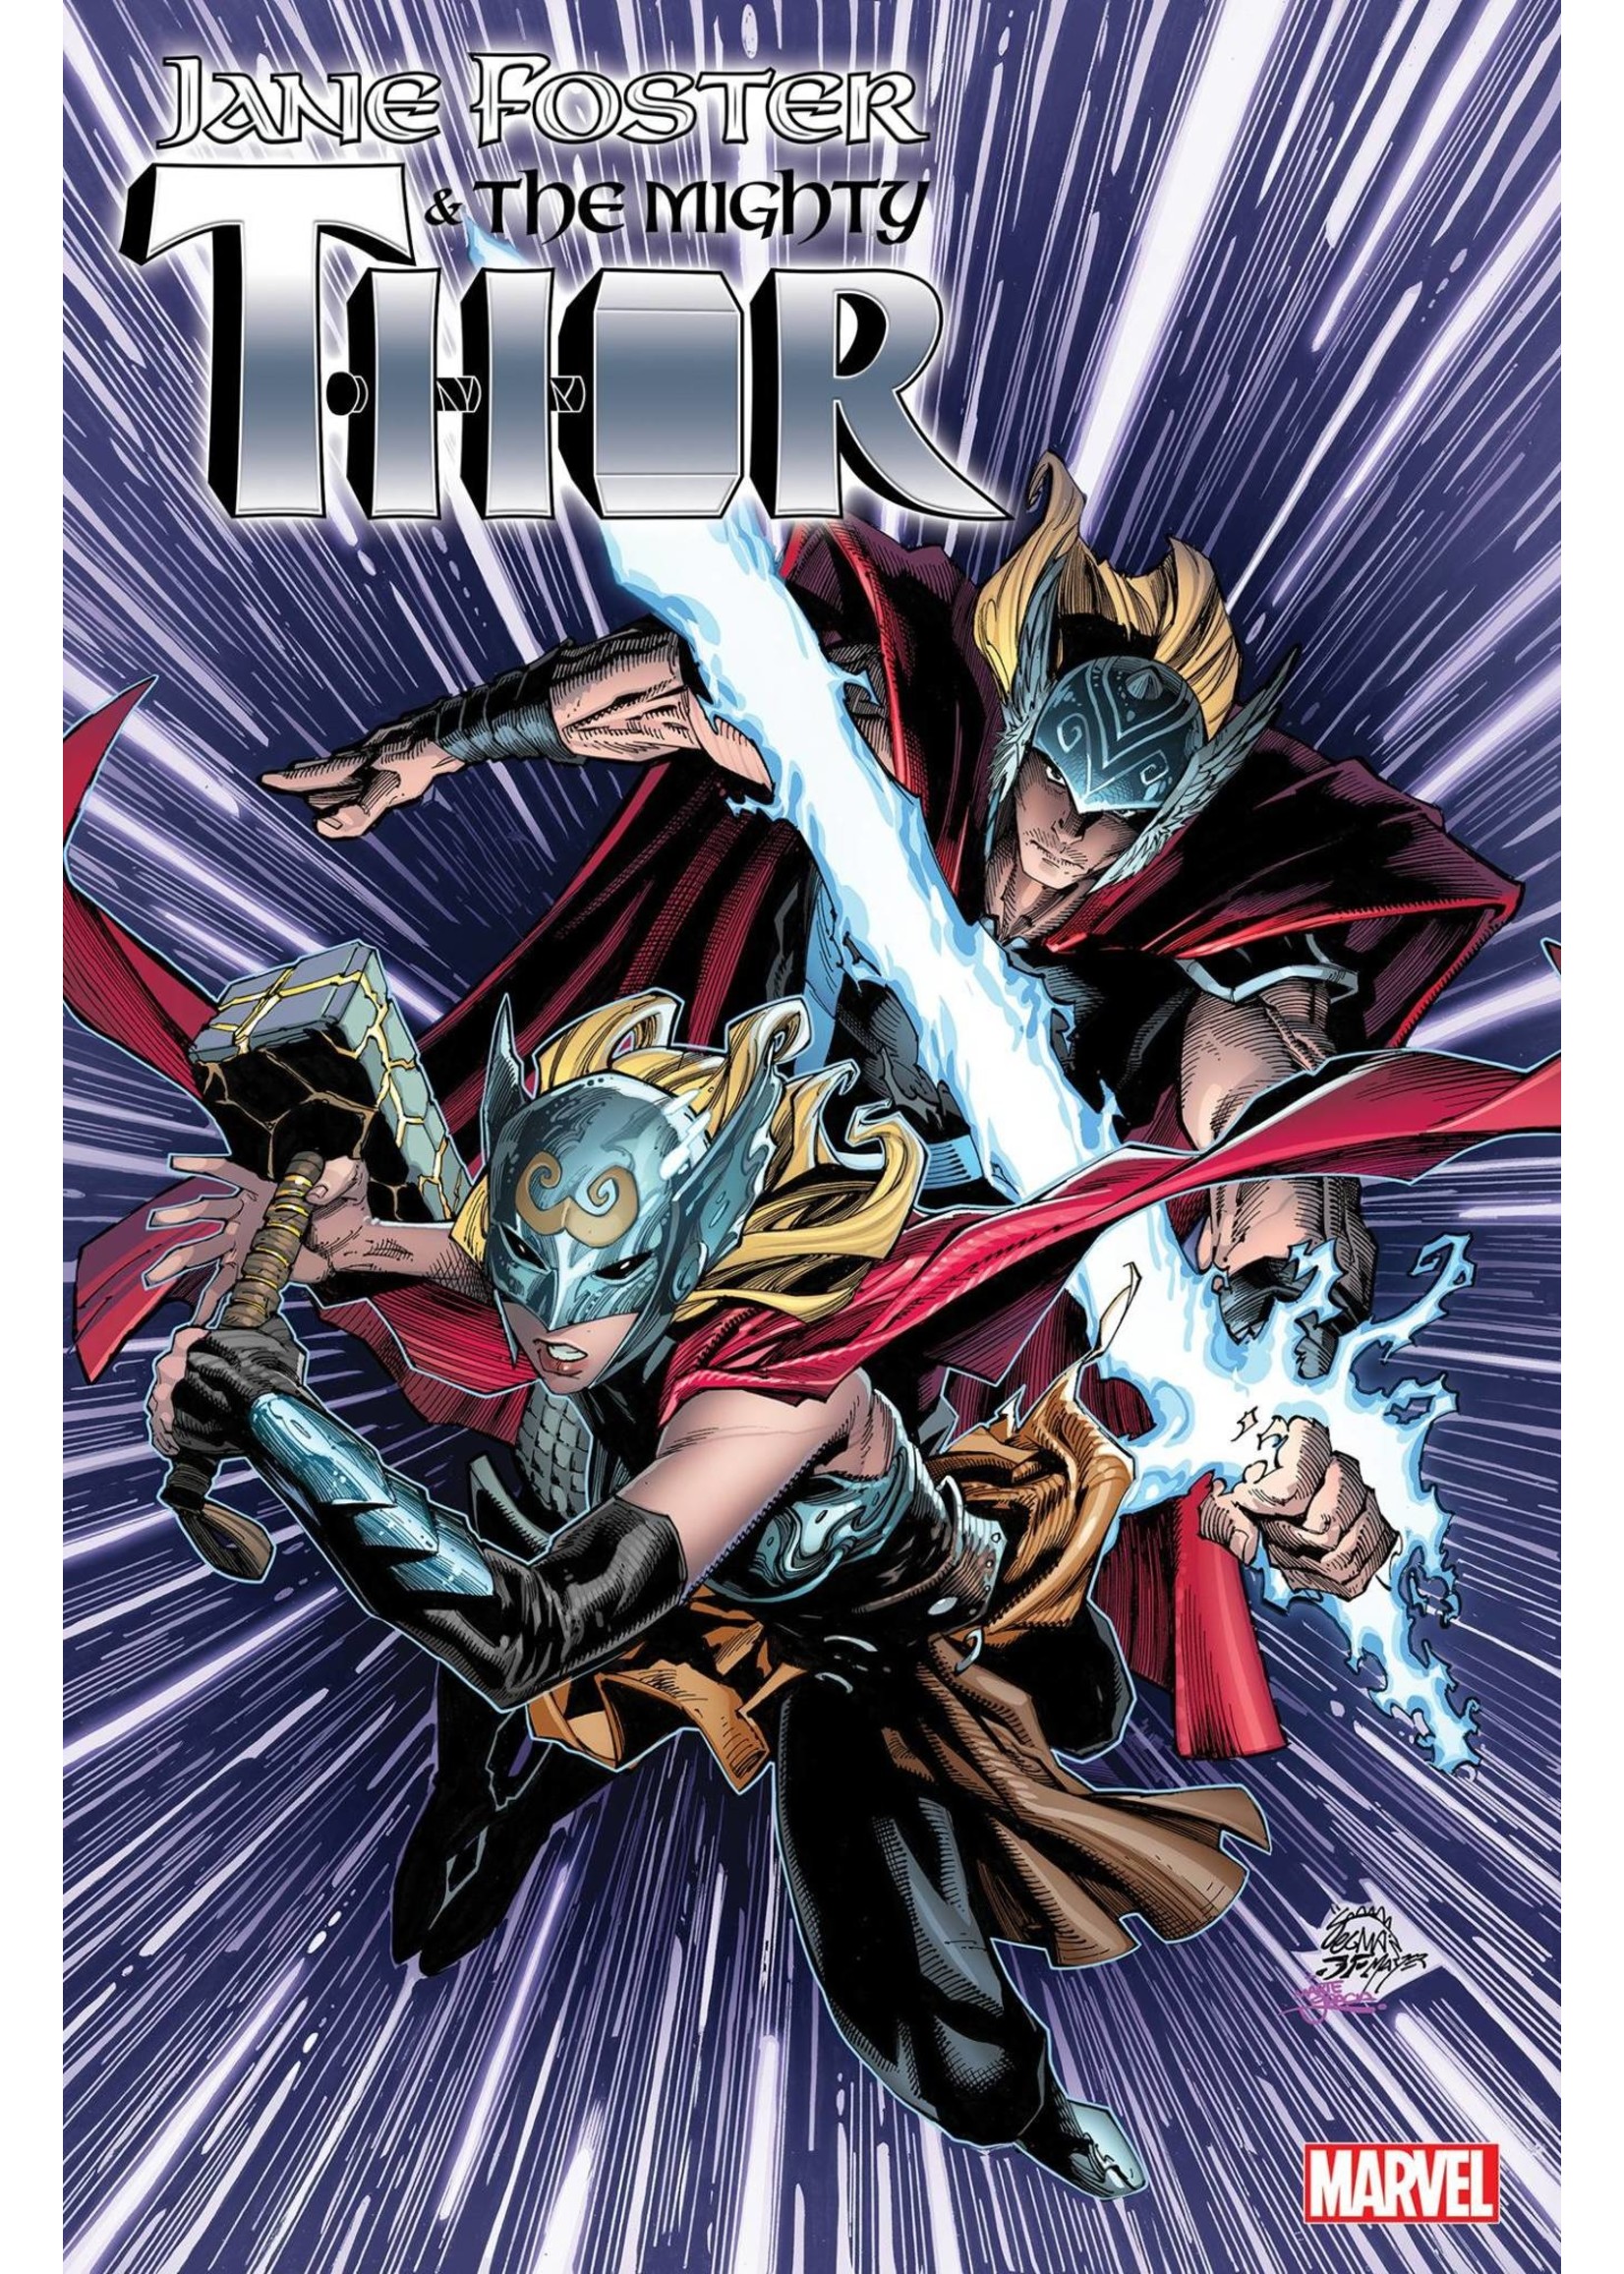 MARVEL COMICS JANE FOSTER AND THE MIGHTY THOR #1 POSTER